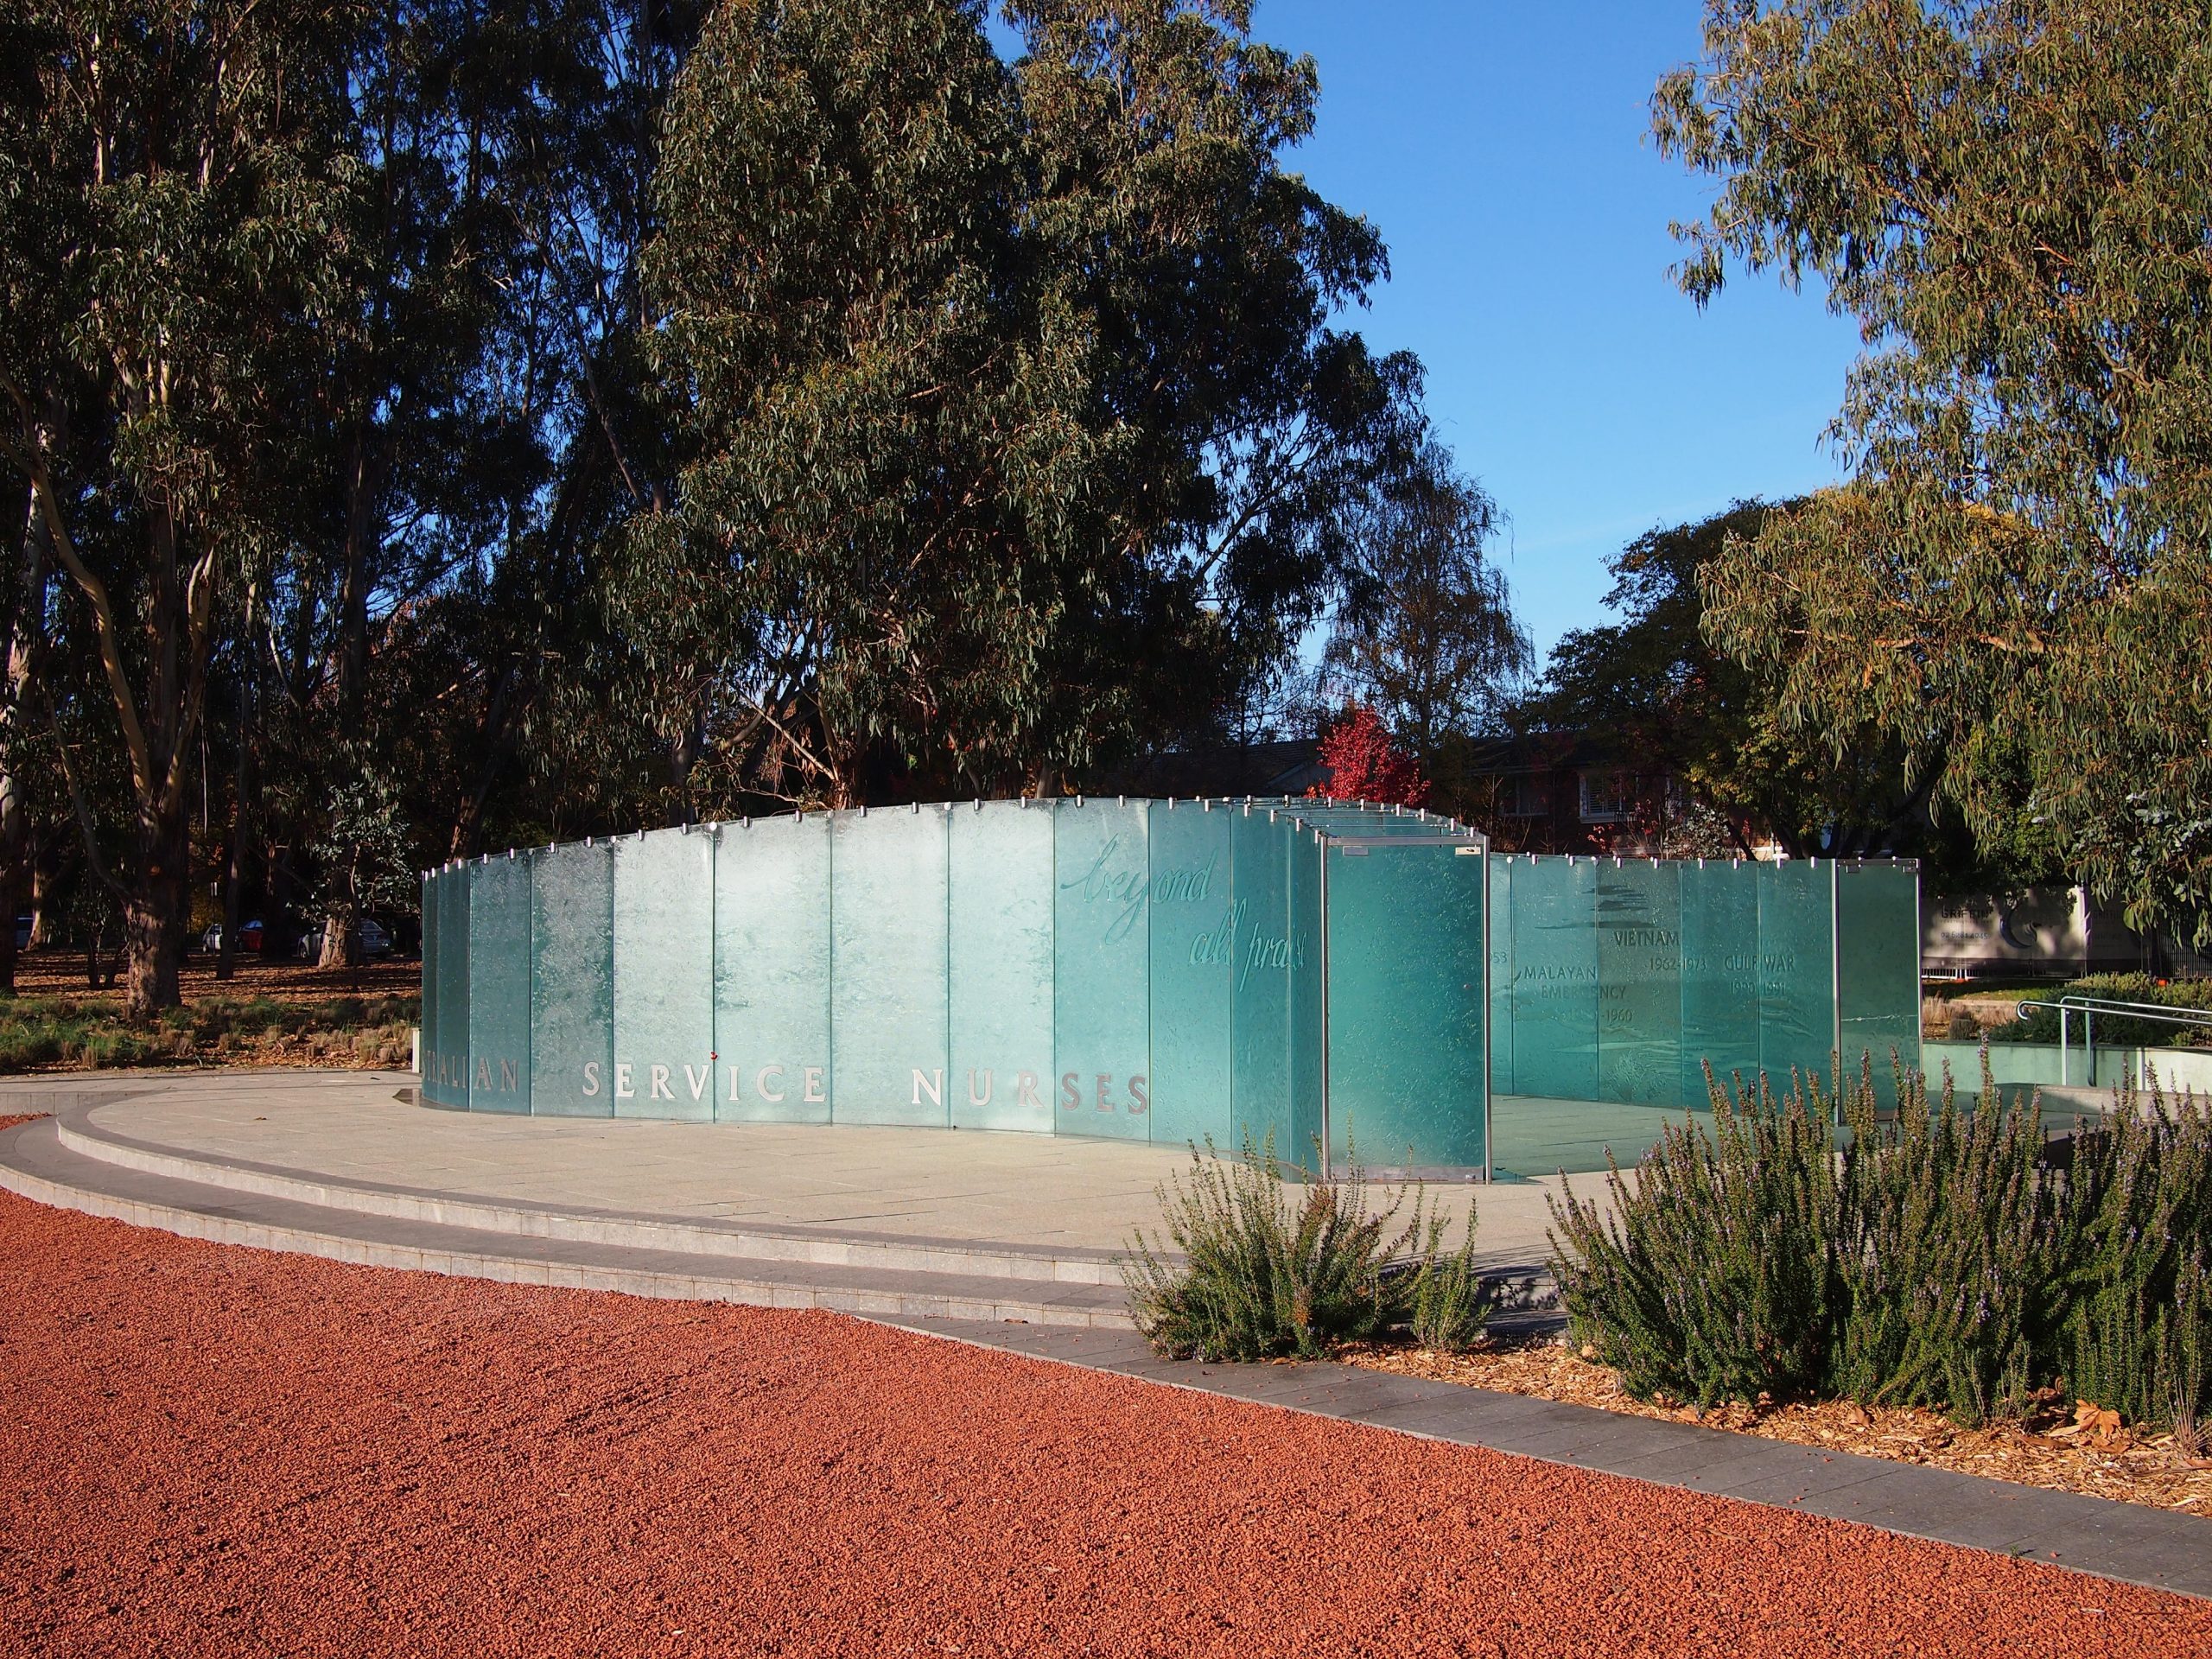 Photo of the Australian Service Nurses National Memorial which looks like a curved wall of glass surrounded by the red Australian dirt